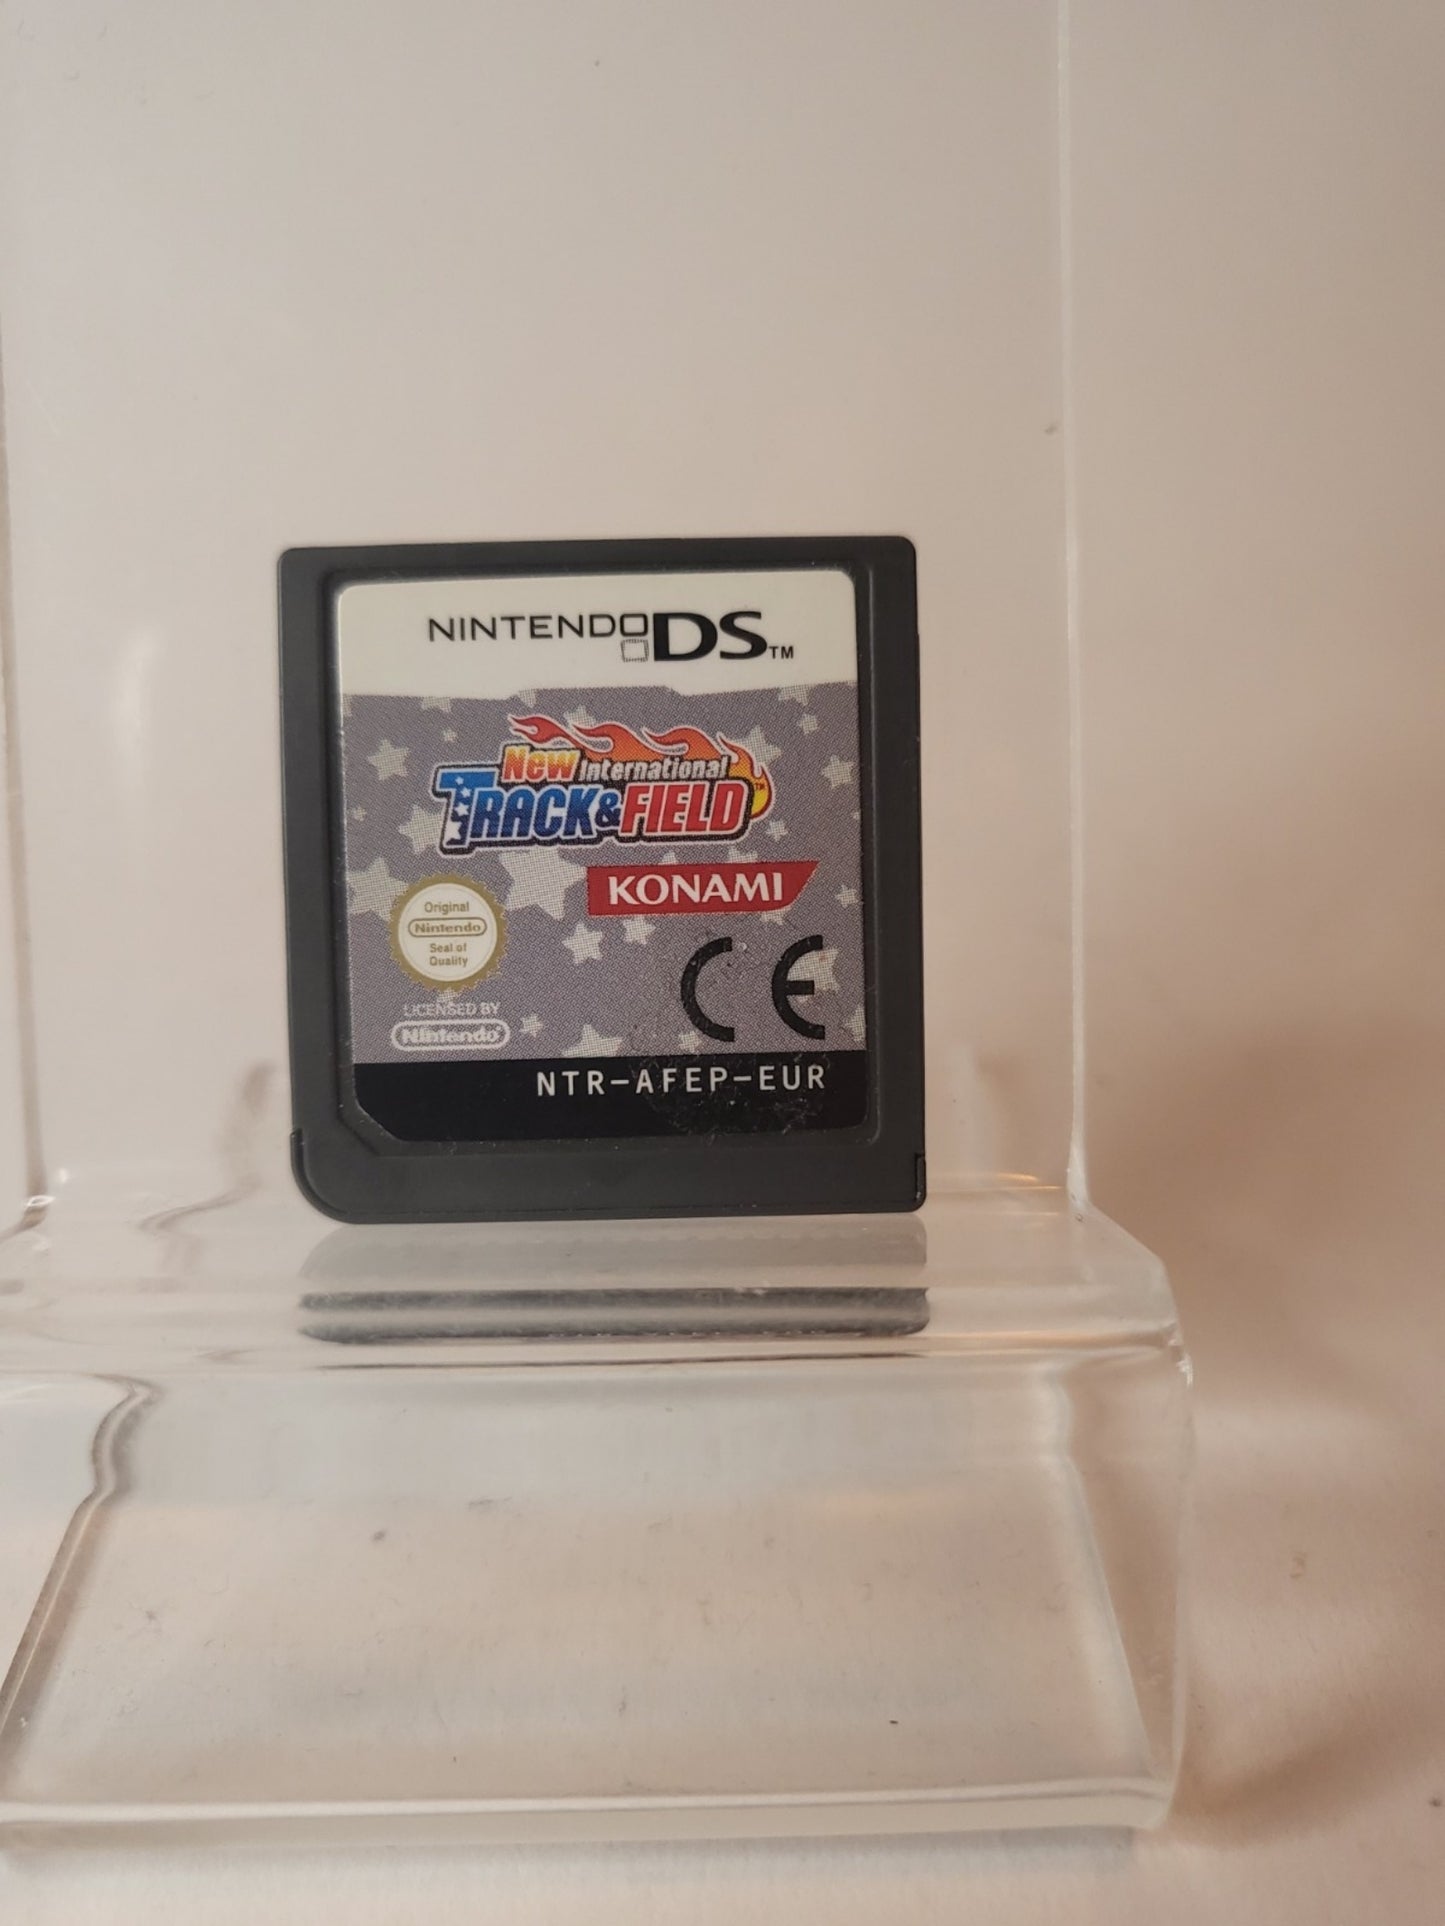 New International Track & Field (Disc Only) Nintendo DS